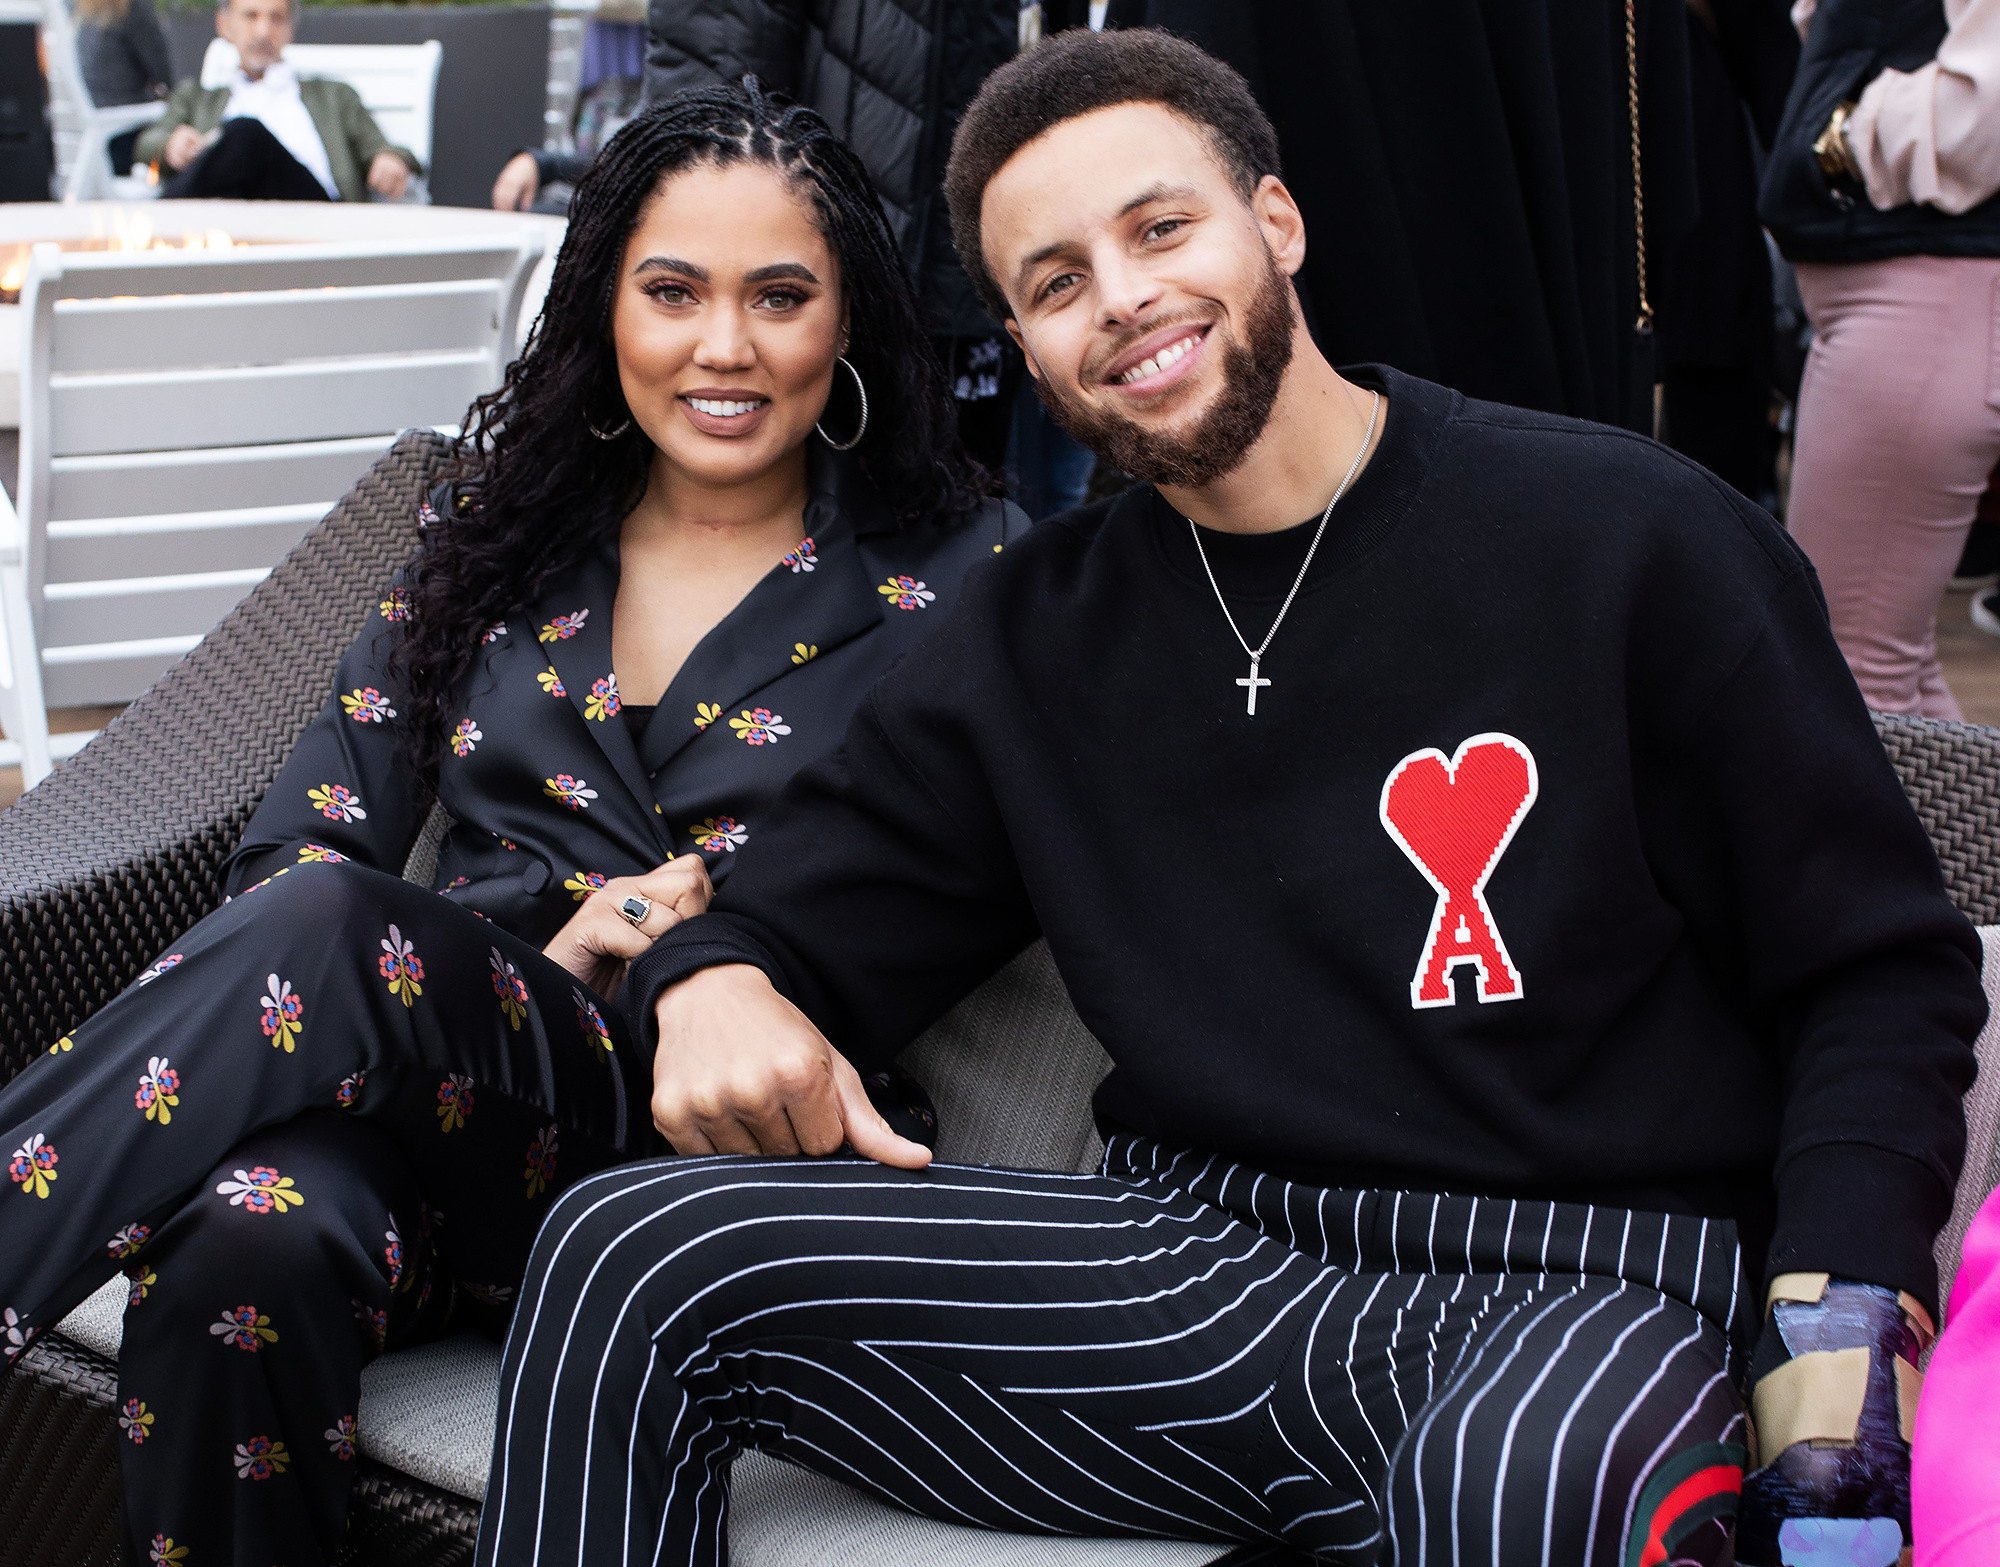 EXCLUSIVE: Stephen And Ayesha Curry Dish On Their Love Story